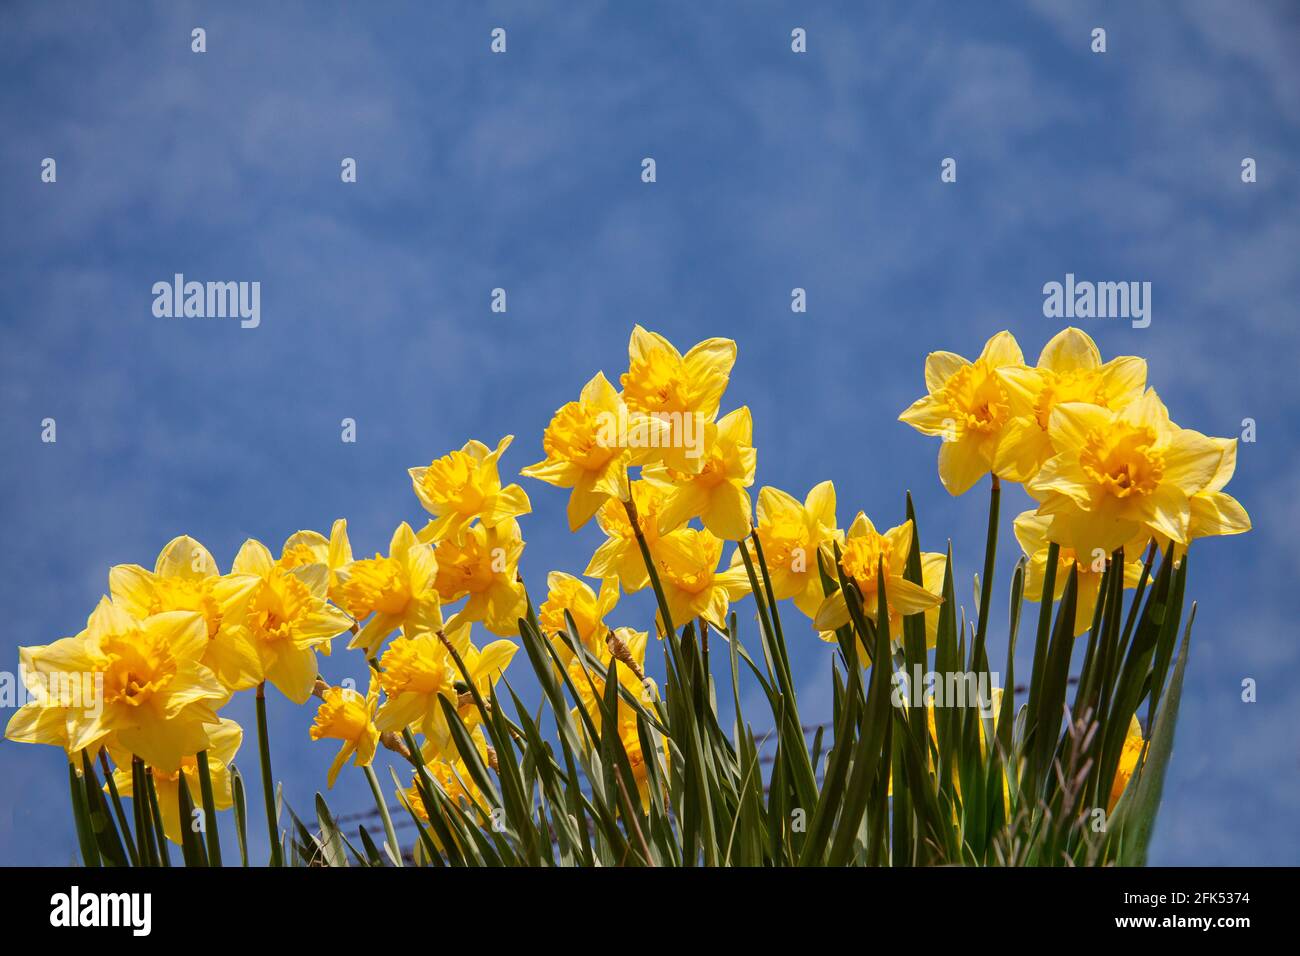 Yellow daffodils seen from below. Low angle shot with blue sky in background. Copy space for writing. Stock Photo